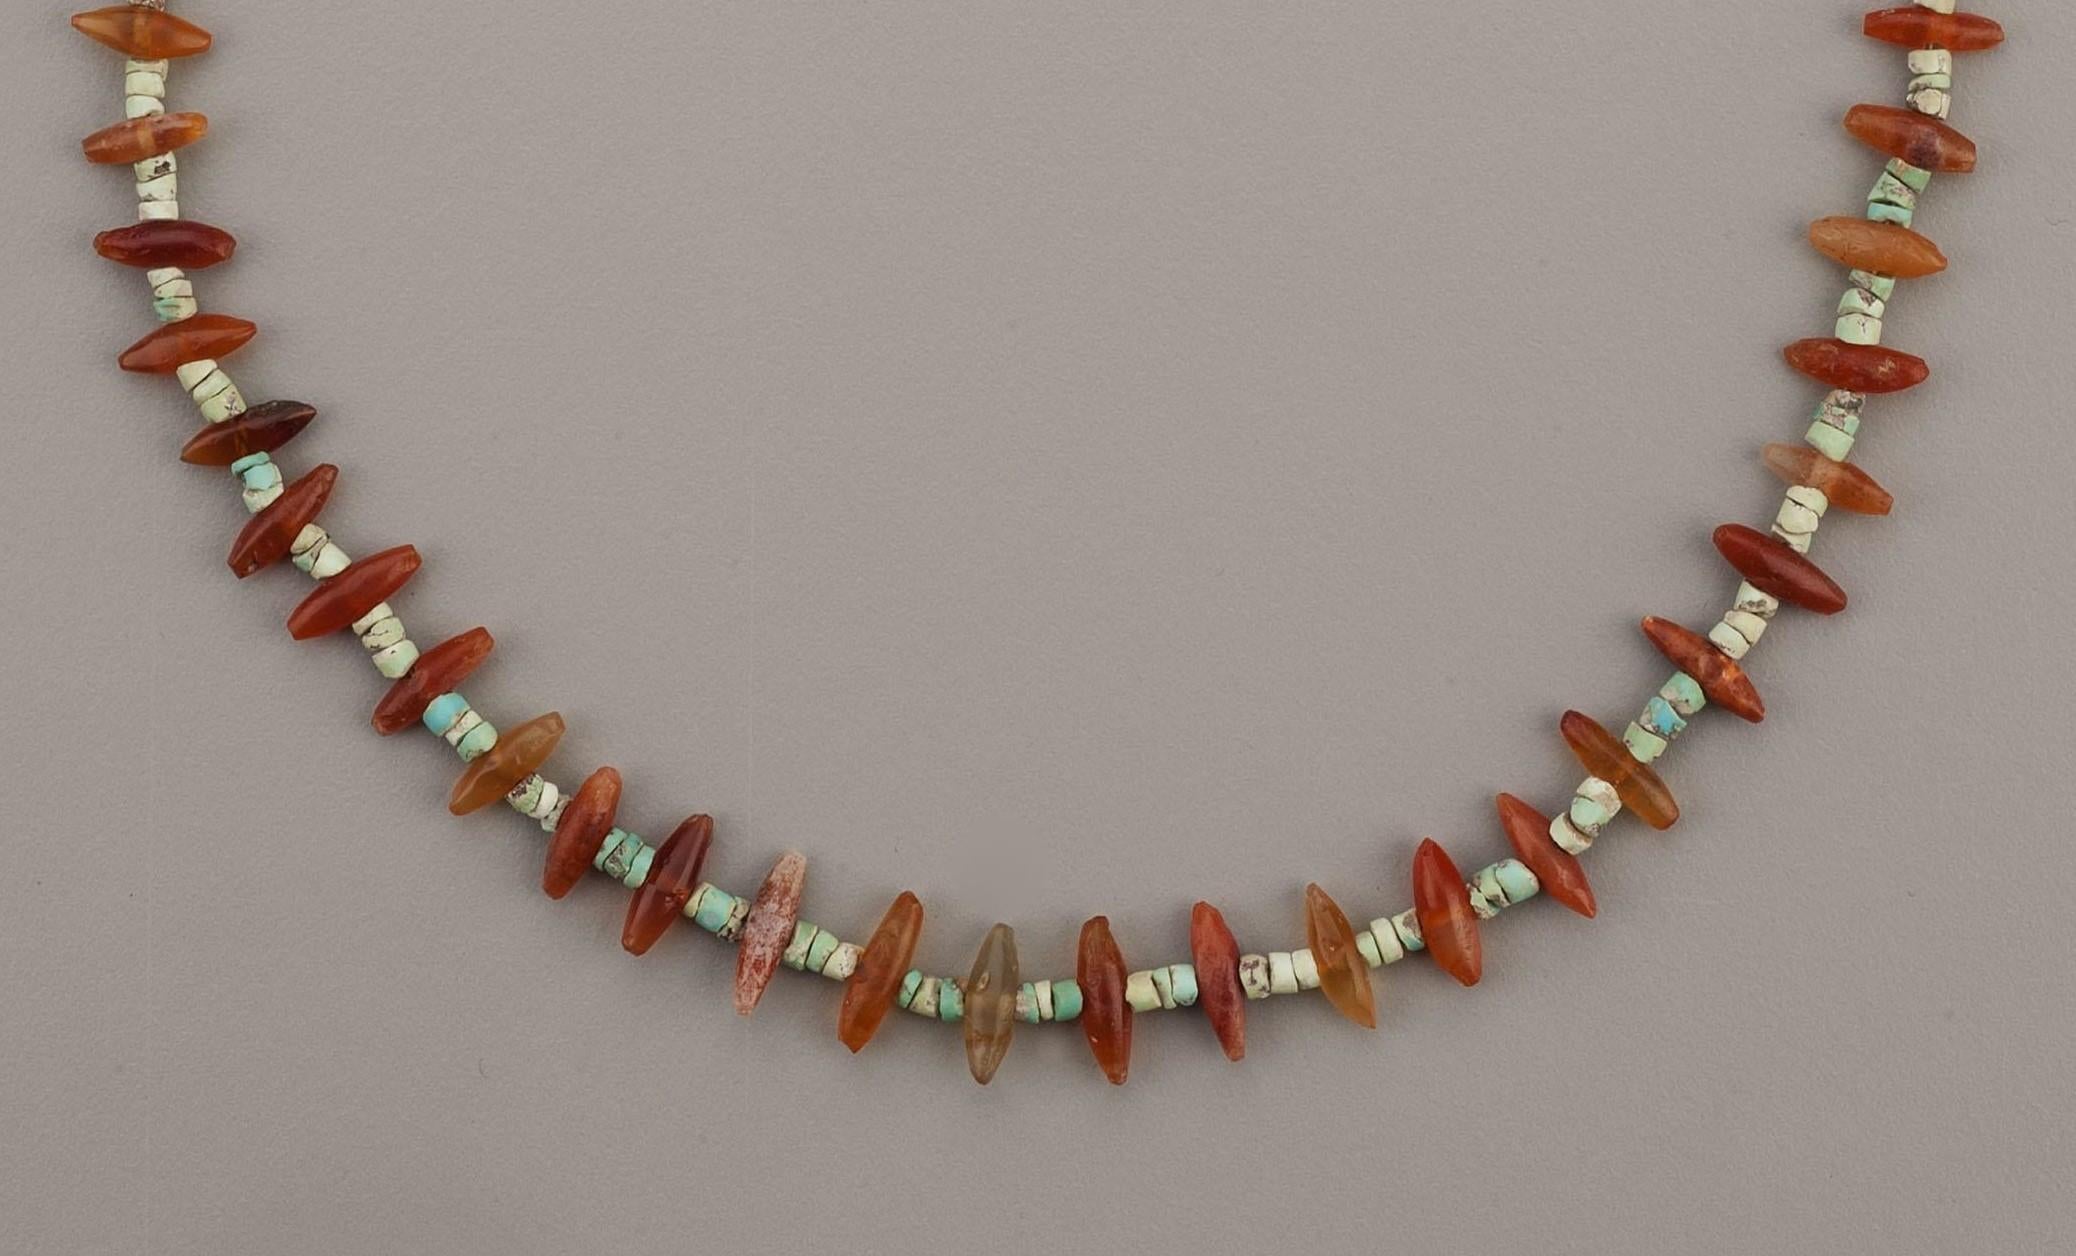 A necklace of fifty-two carnelian “spars” alternating with groups of three turquoise disc beads. The carnelian beads graduate slightly in size from the front of the necklace to the back. The height of the “spars” at the center is 1.2 cm and the